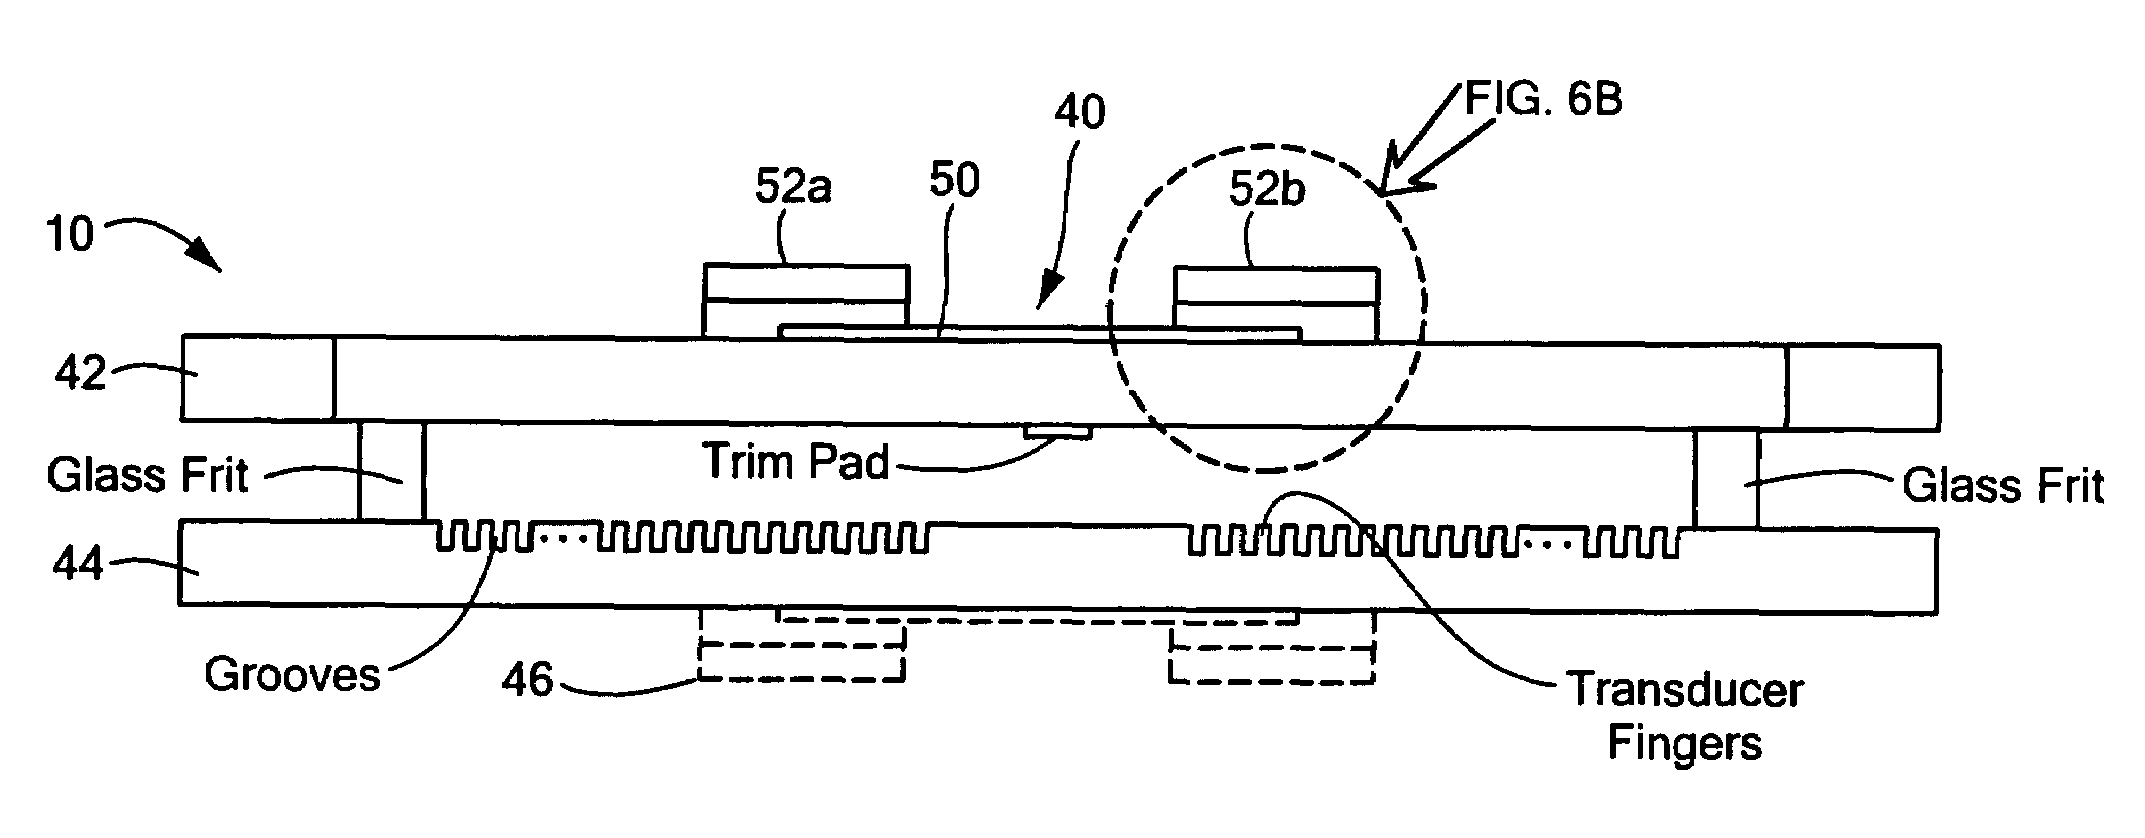 Integrated saw device heater